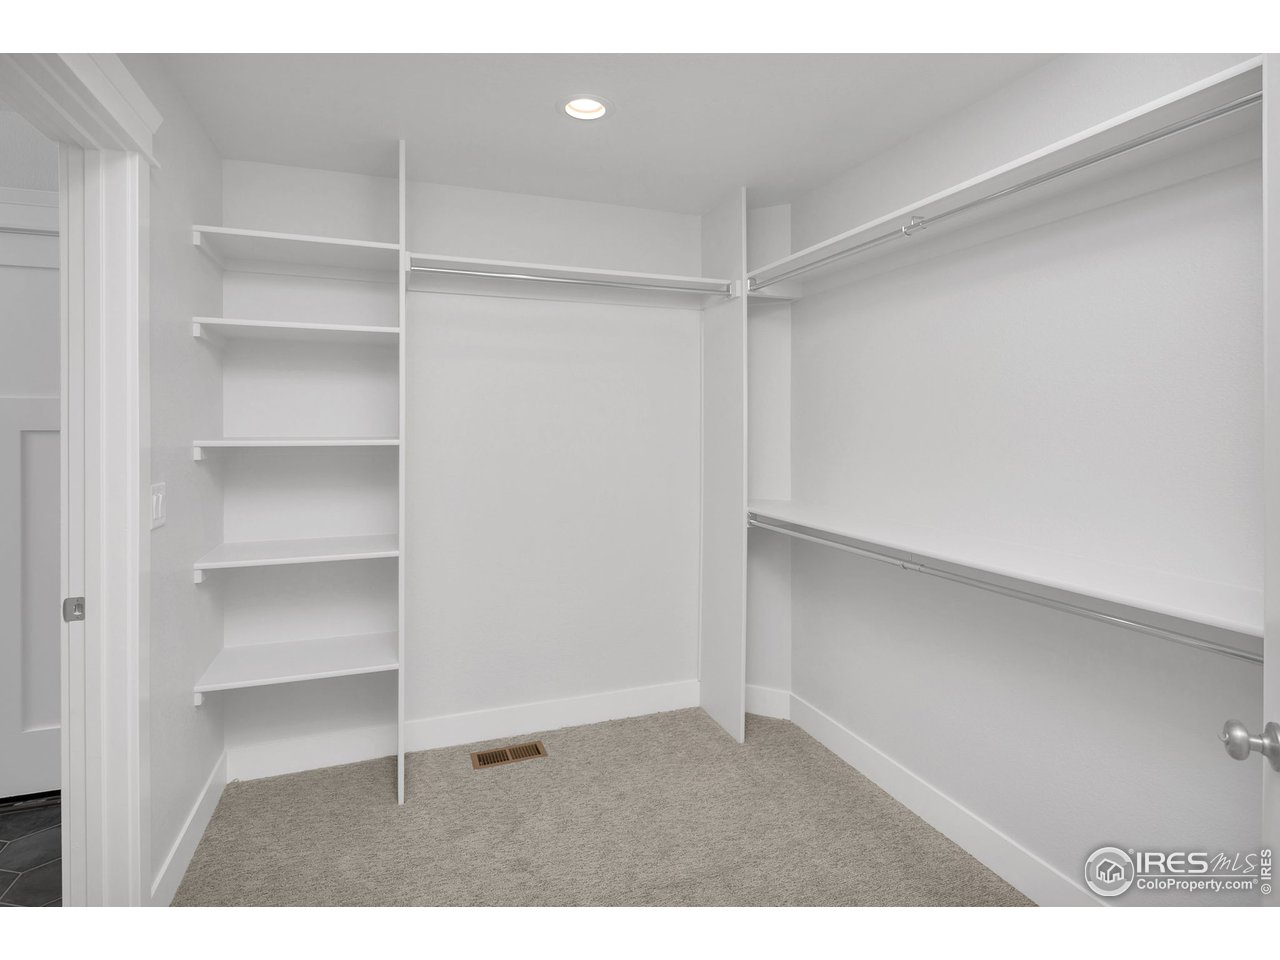 The walk-in primary closet, with a convenient door to the laundry room